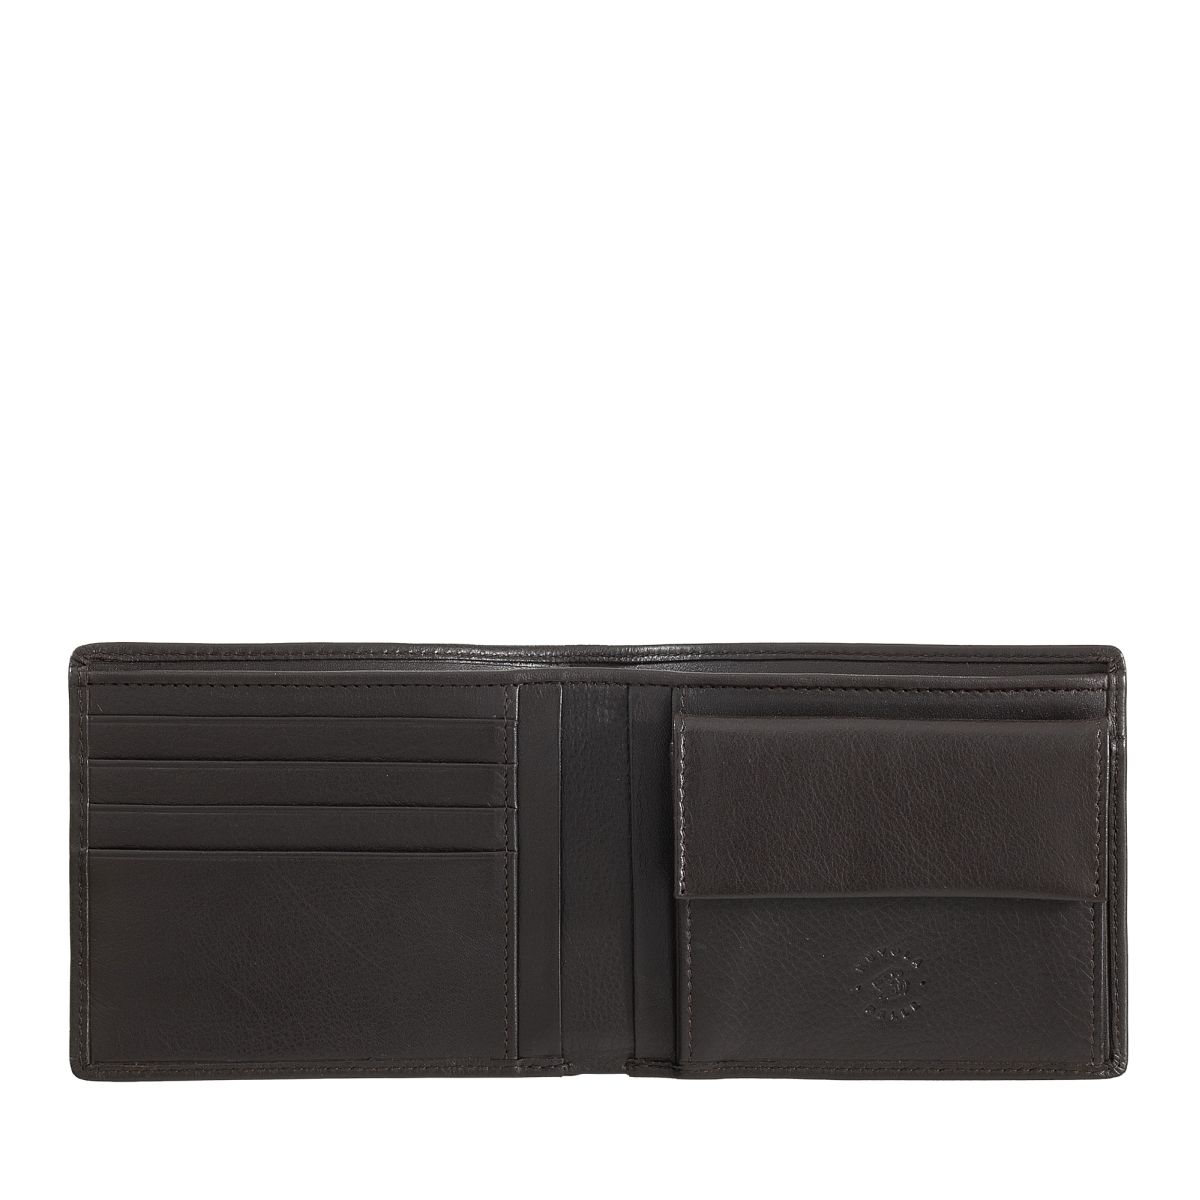 Slim Leather Wallet With Coin Pocket - Dark Brown